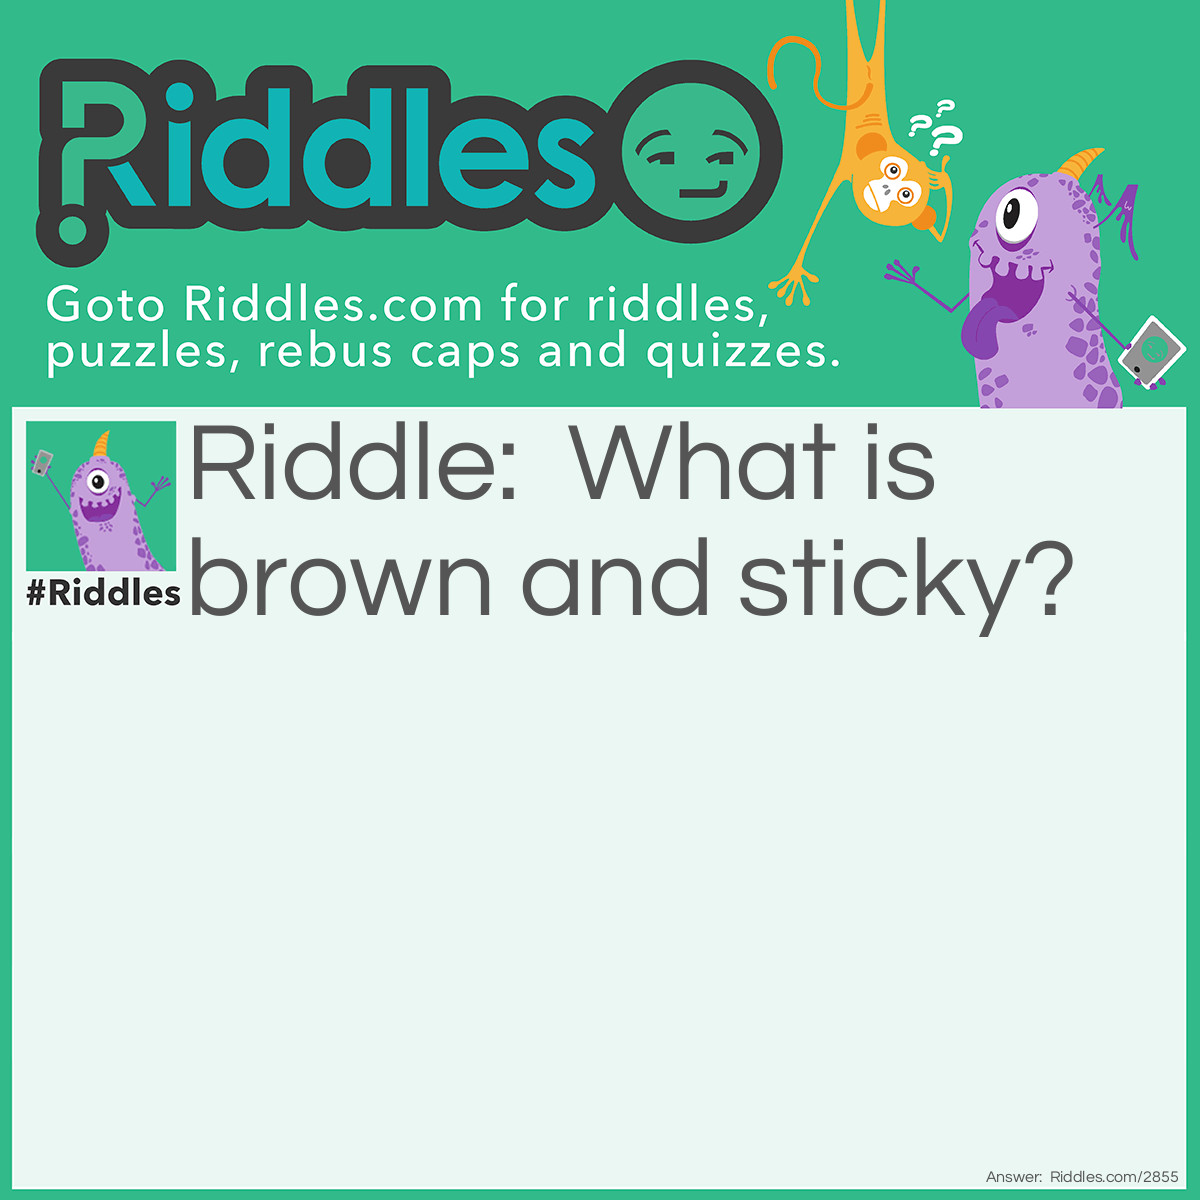 Riddle: What is brown and sticky? Answer: A stick!